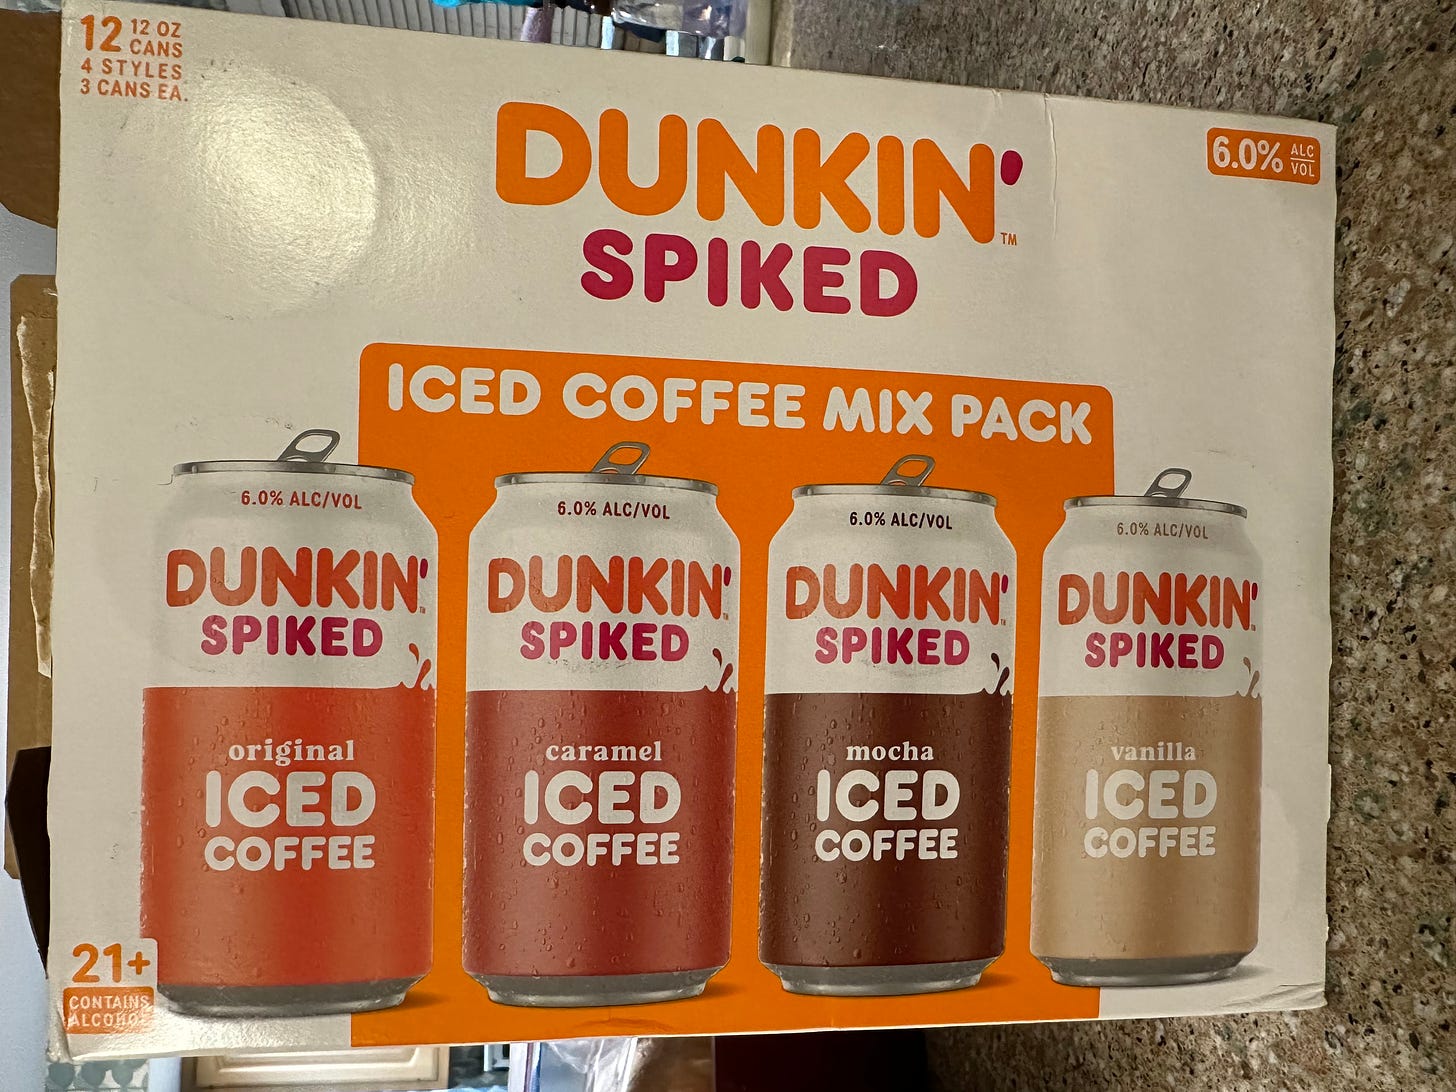 The Dunkin' spiked coffee variety pack.